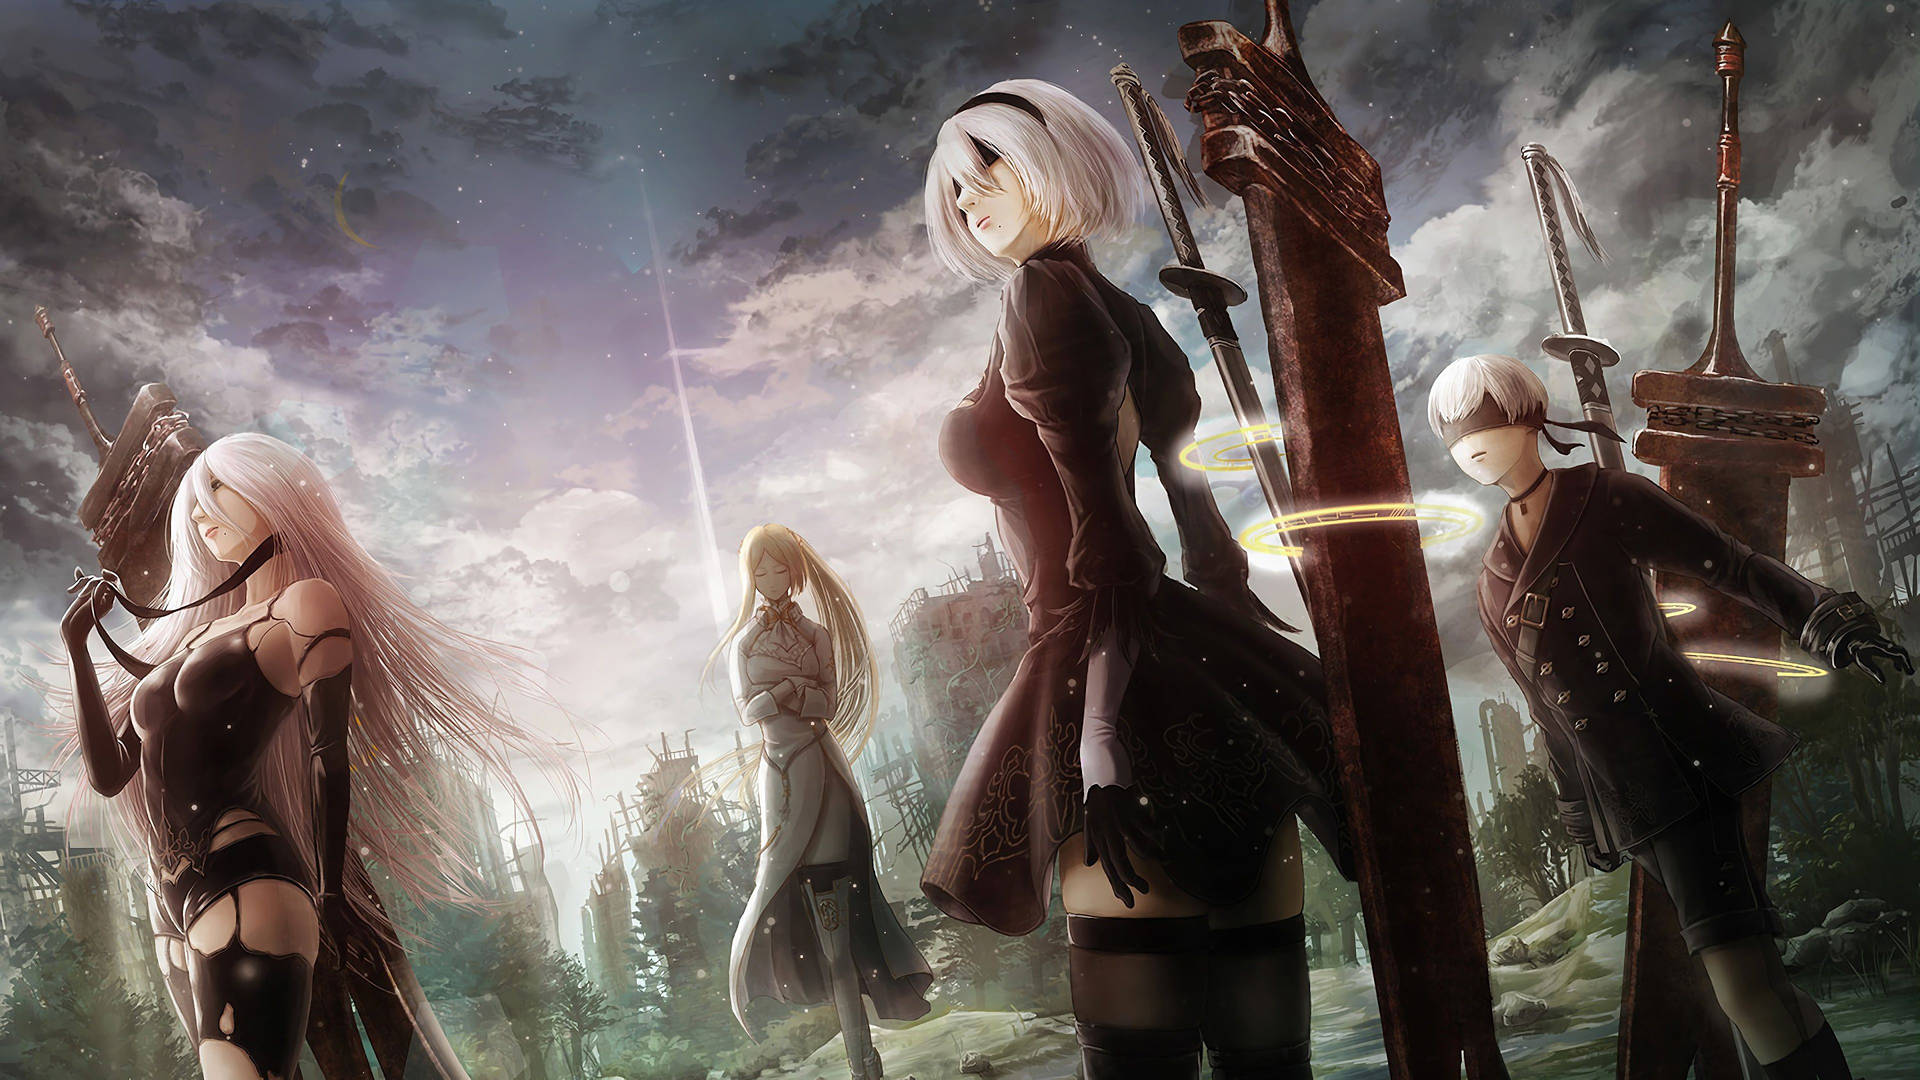 Nier Automata protagonists: 2B, 9S and the Commander Wallpaper